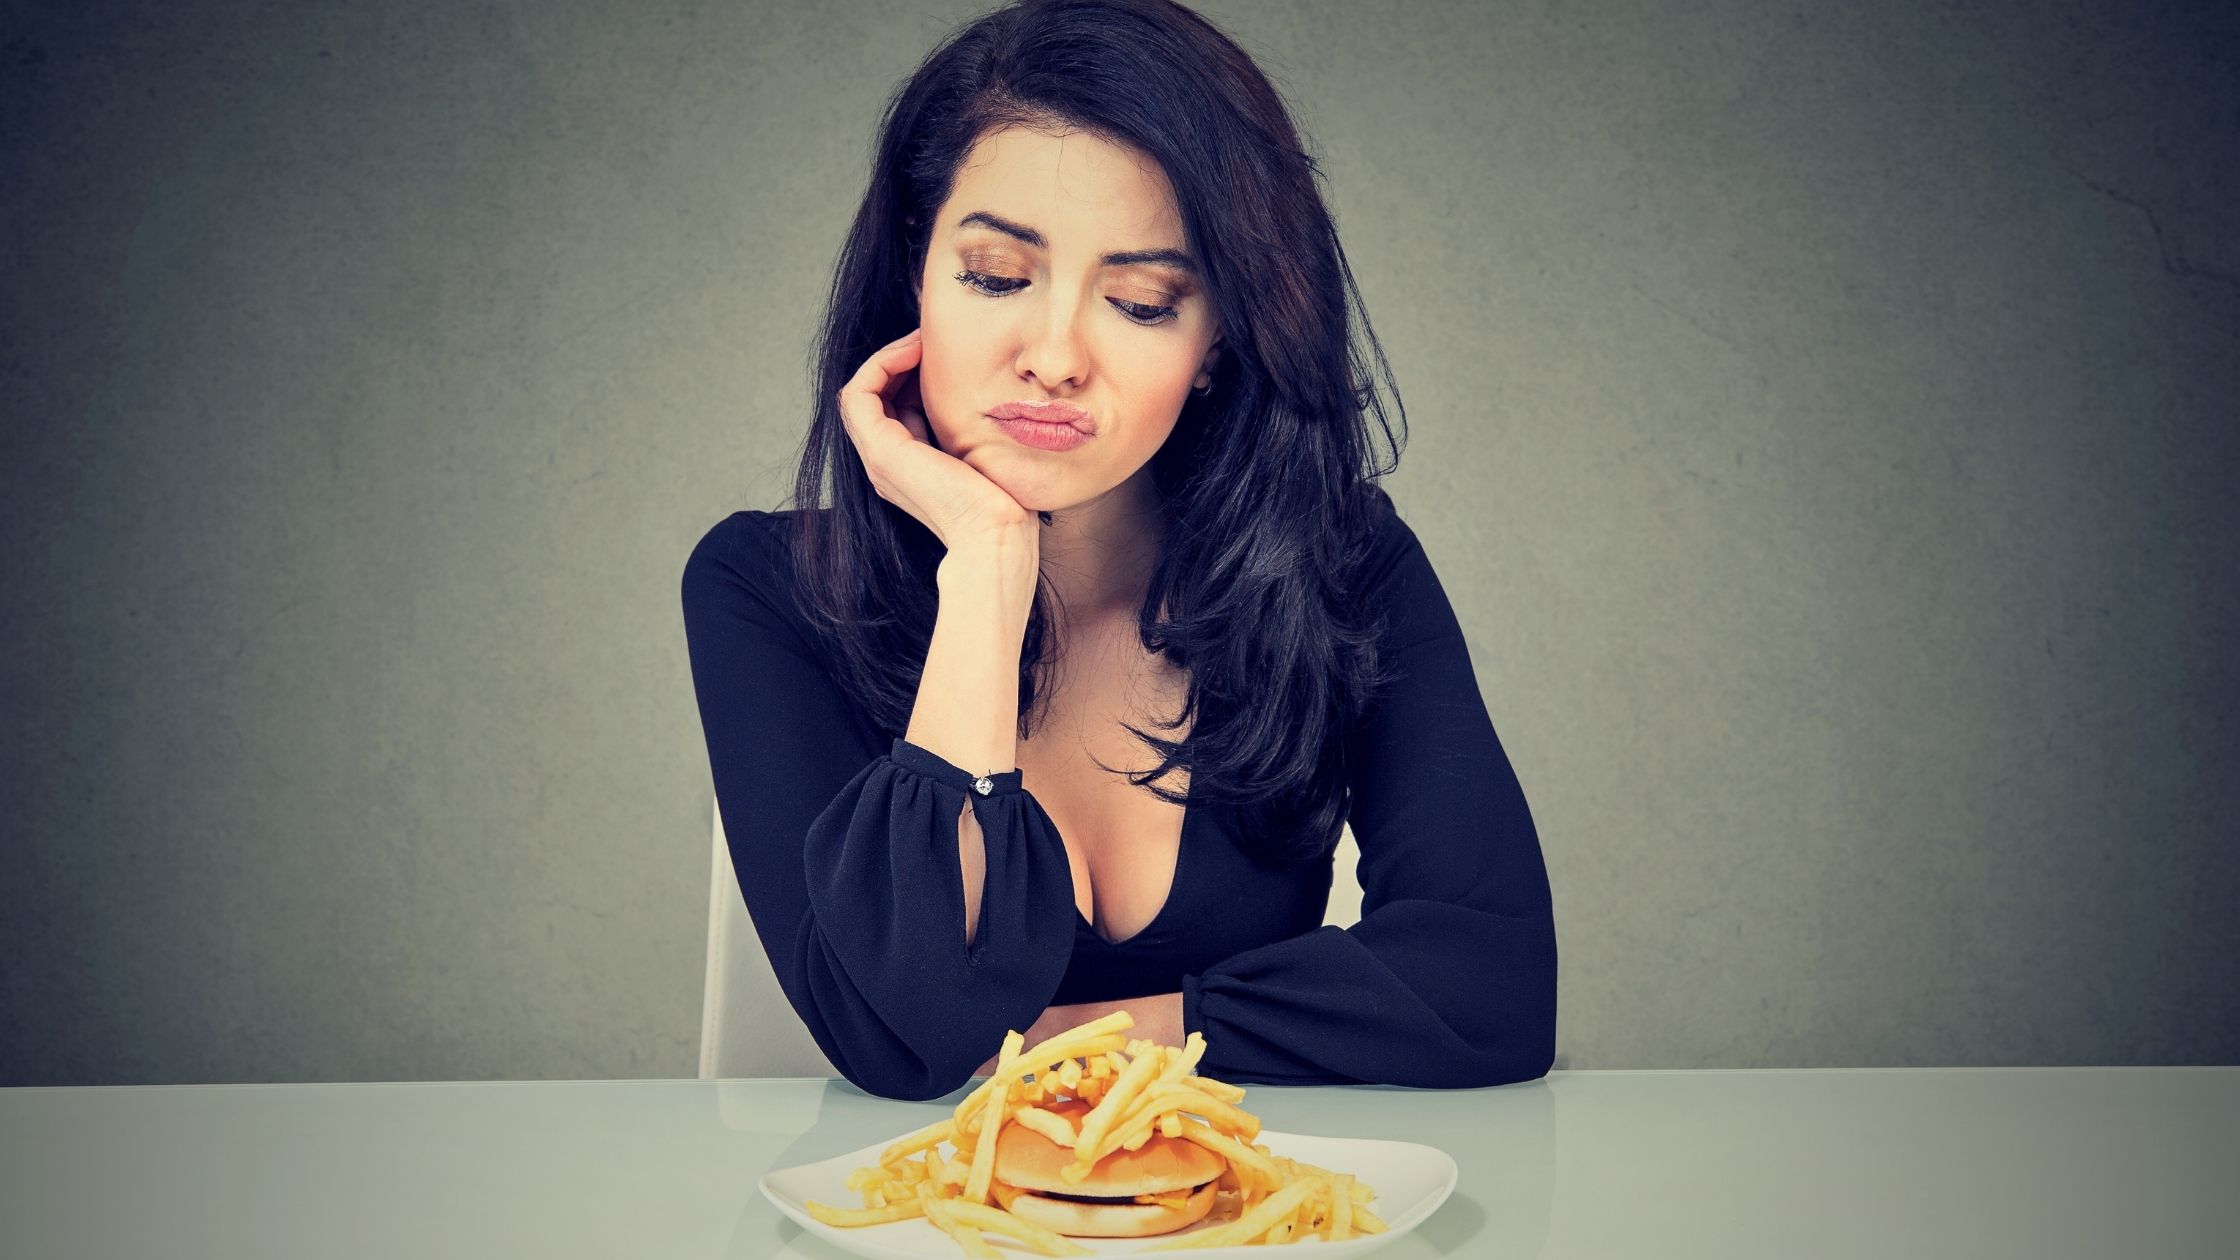 Food cravings has a dark haired women wanting French fries